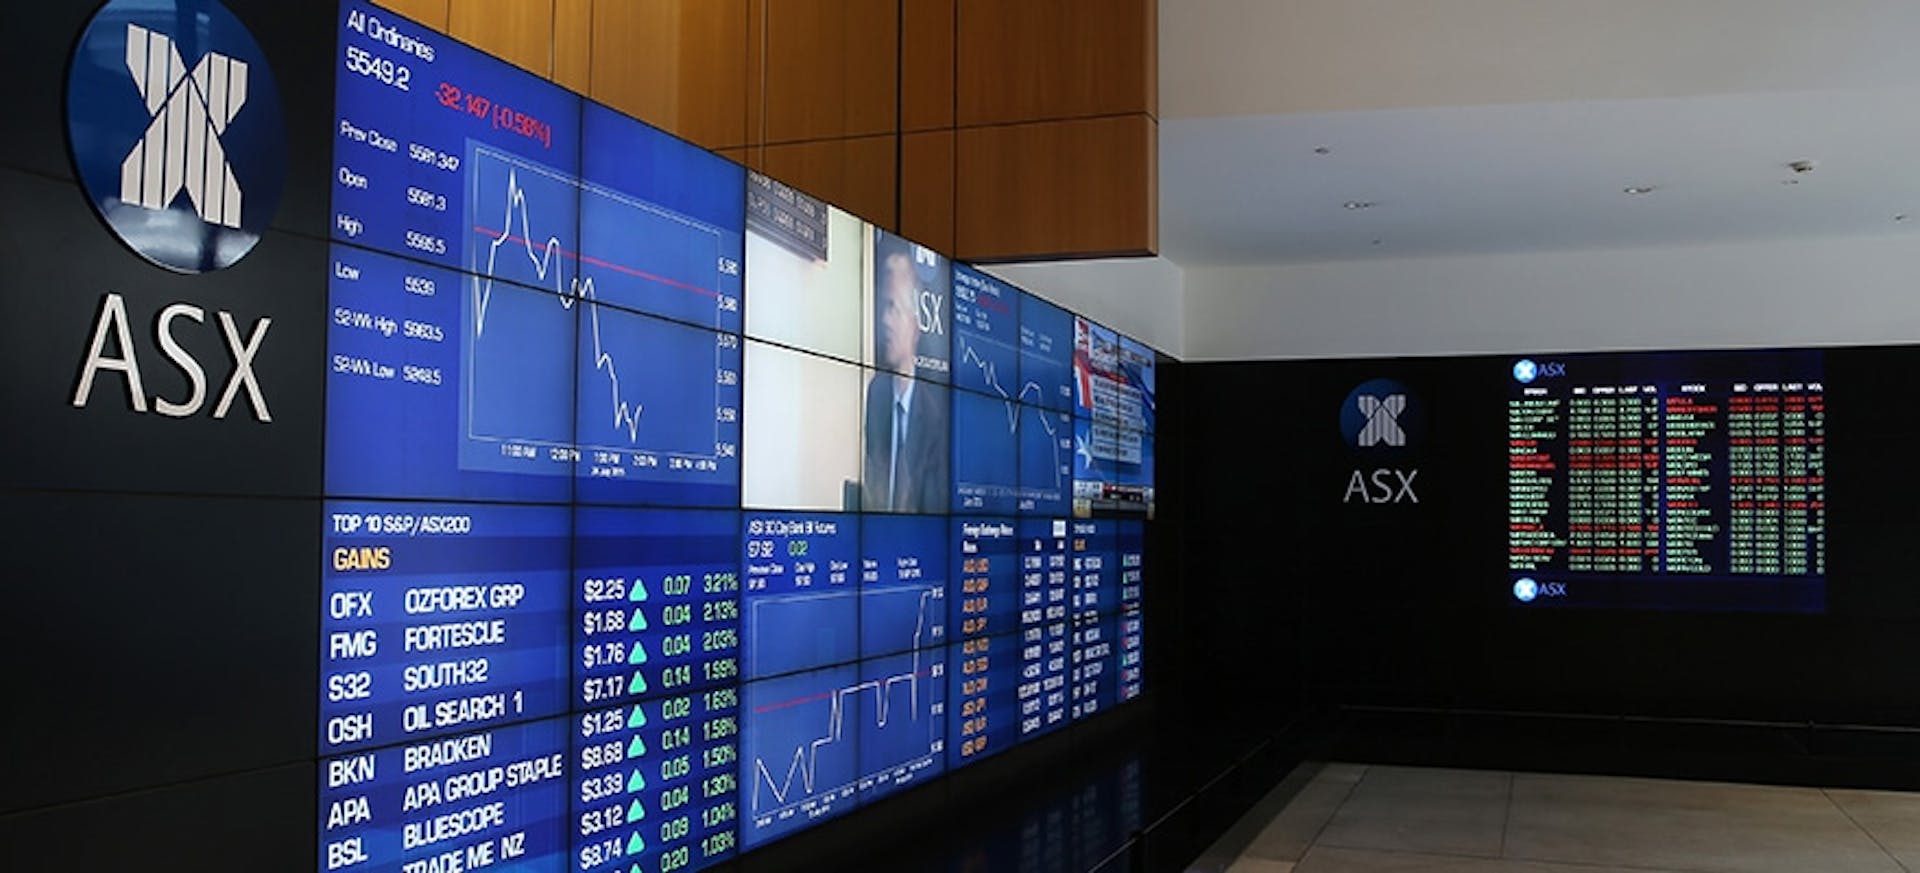 The Australian Stock Exchange (ASX) is one of the many traditional finance institutions that have taken an interest in blockchain technology - image from financemagnates.com